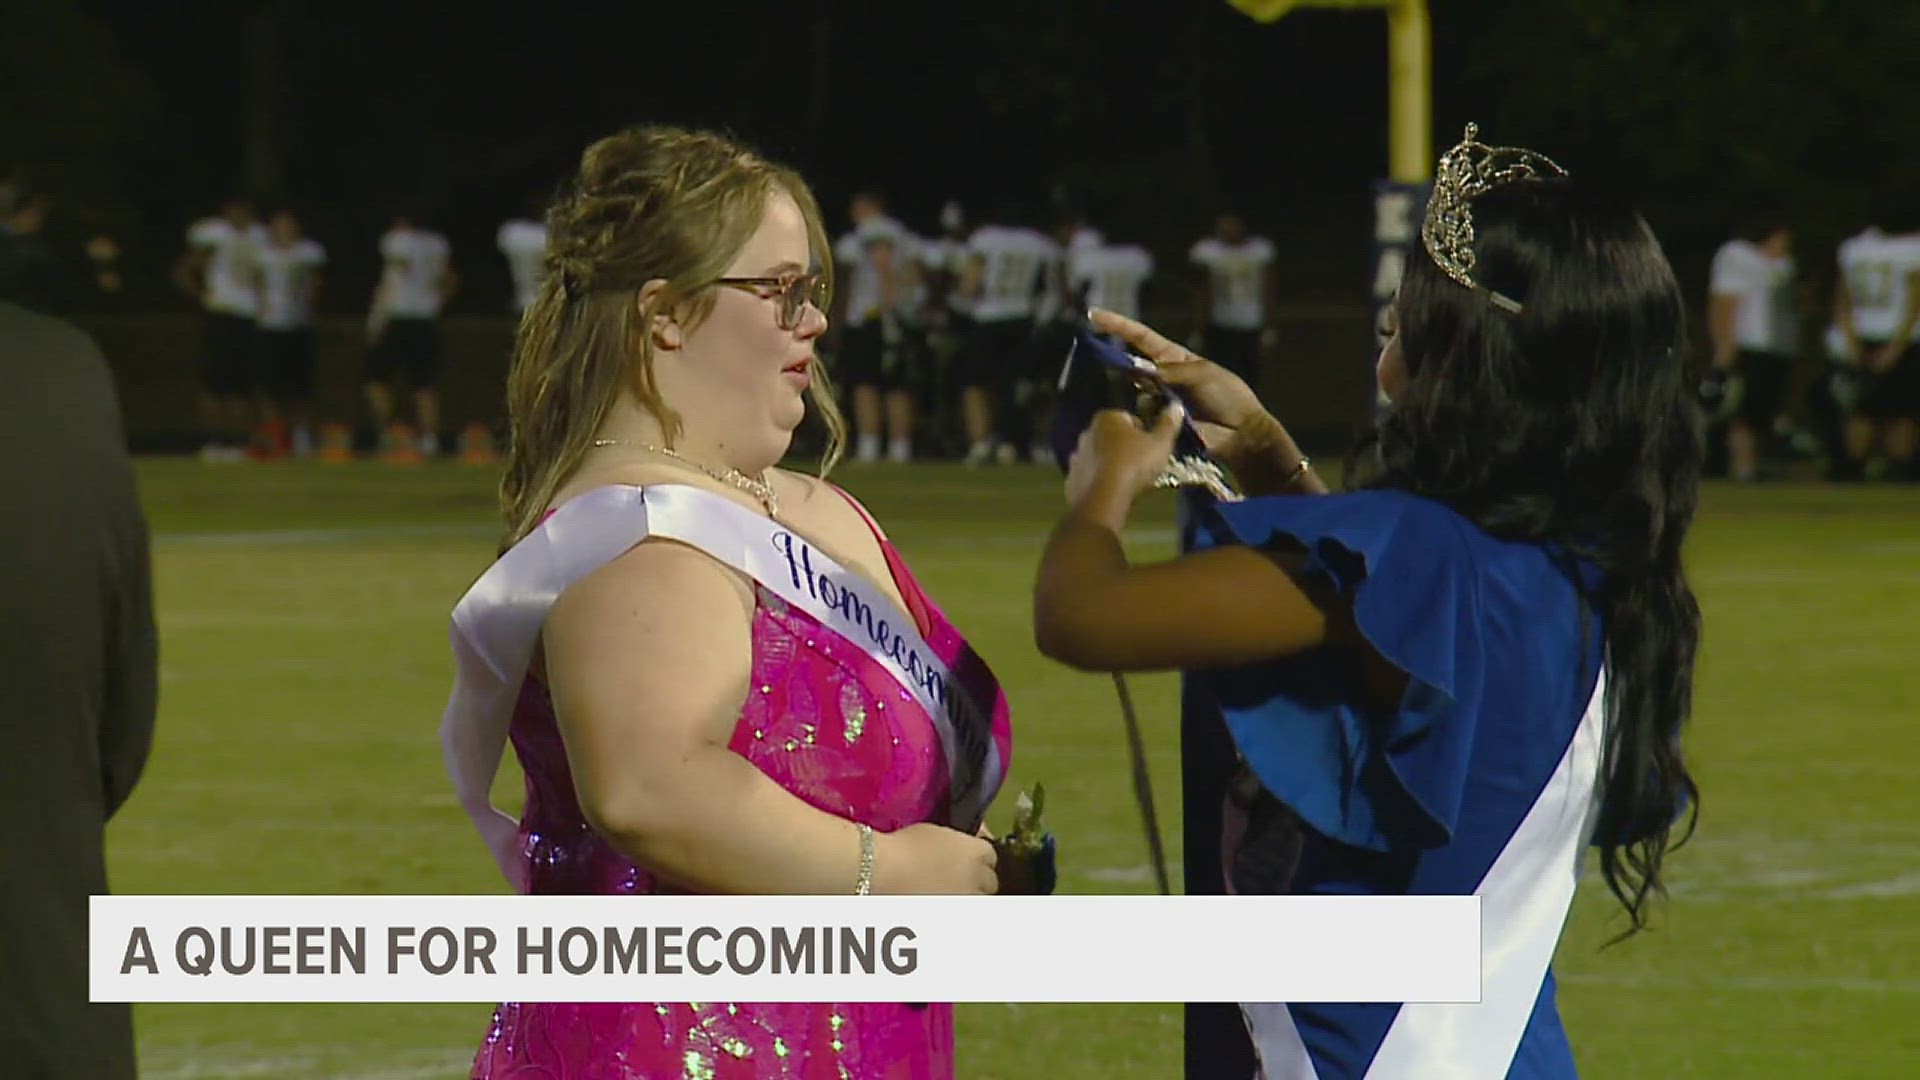 East Forsyth High School honoring homecoming queen with Down Syndrome